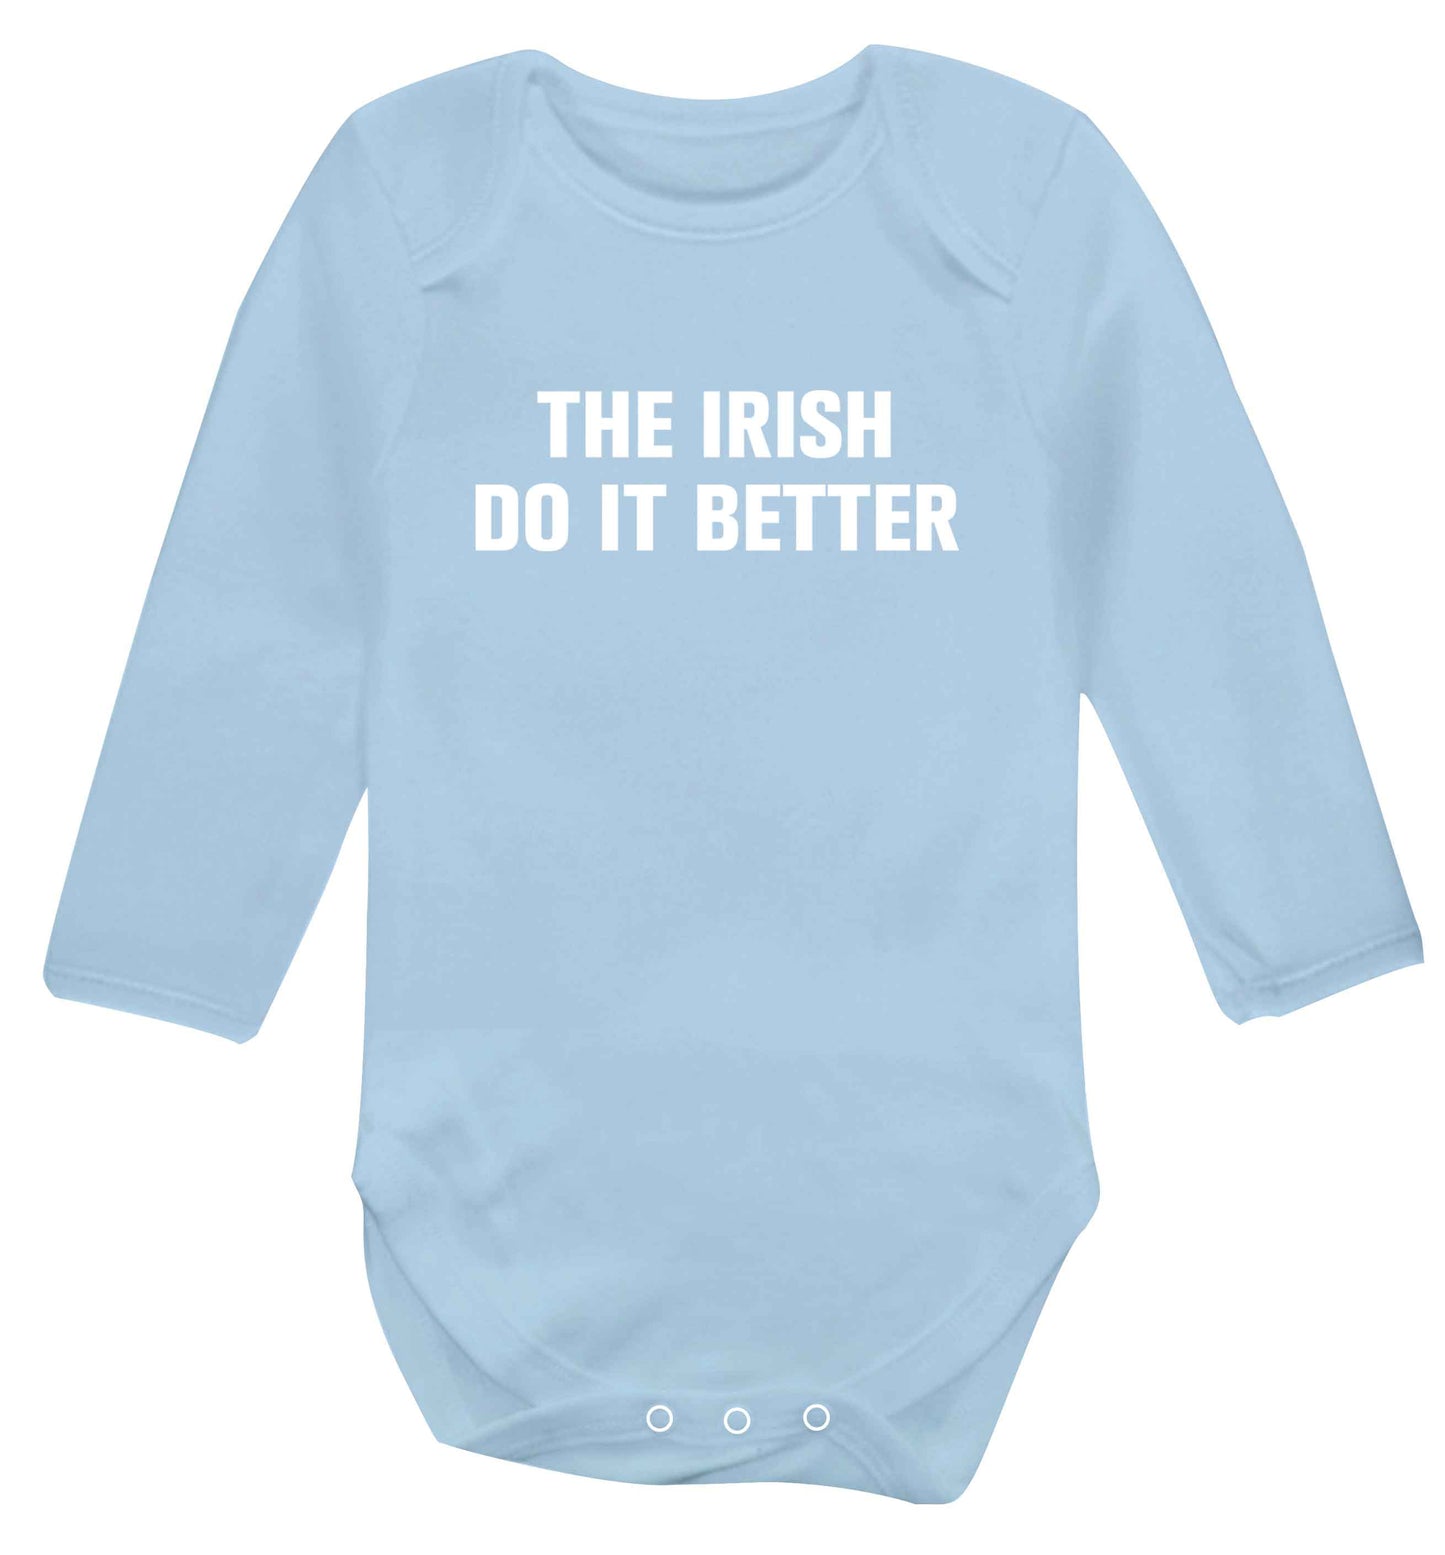 The Irish do it better baby vest long sleeved pale blue 6-12 months